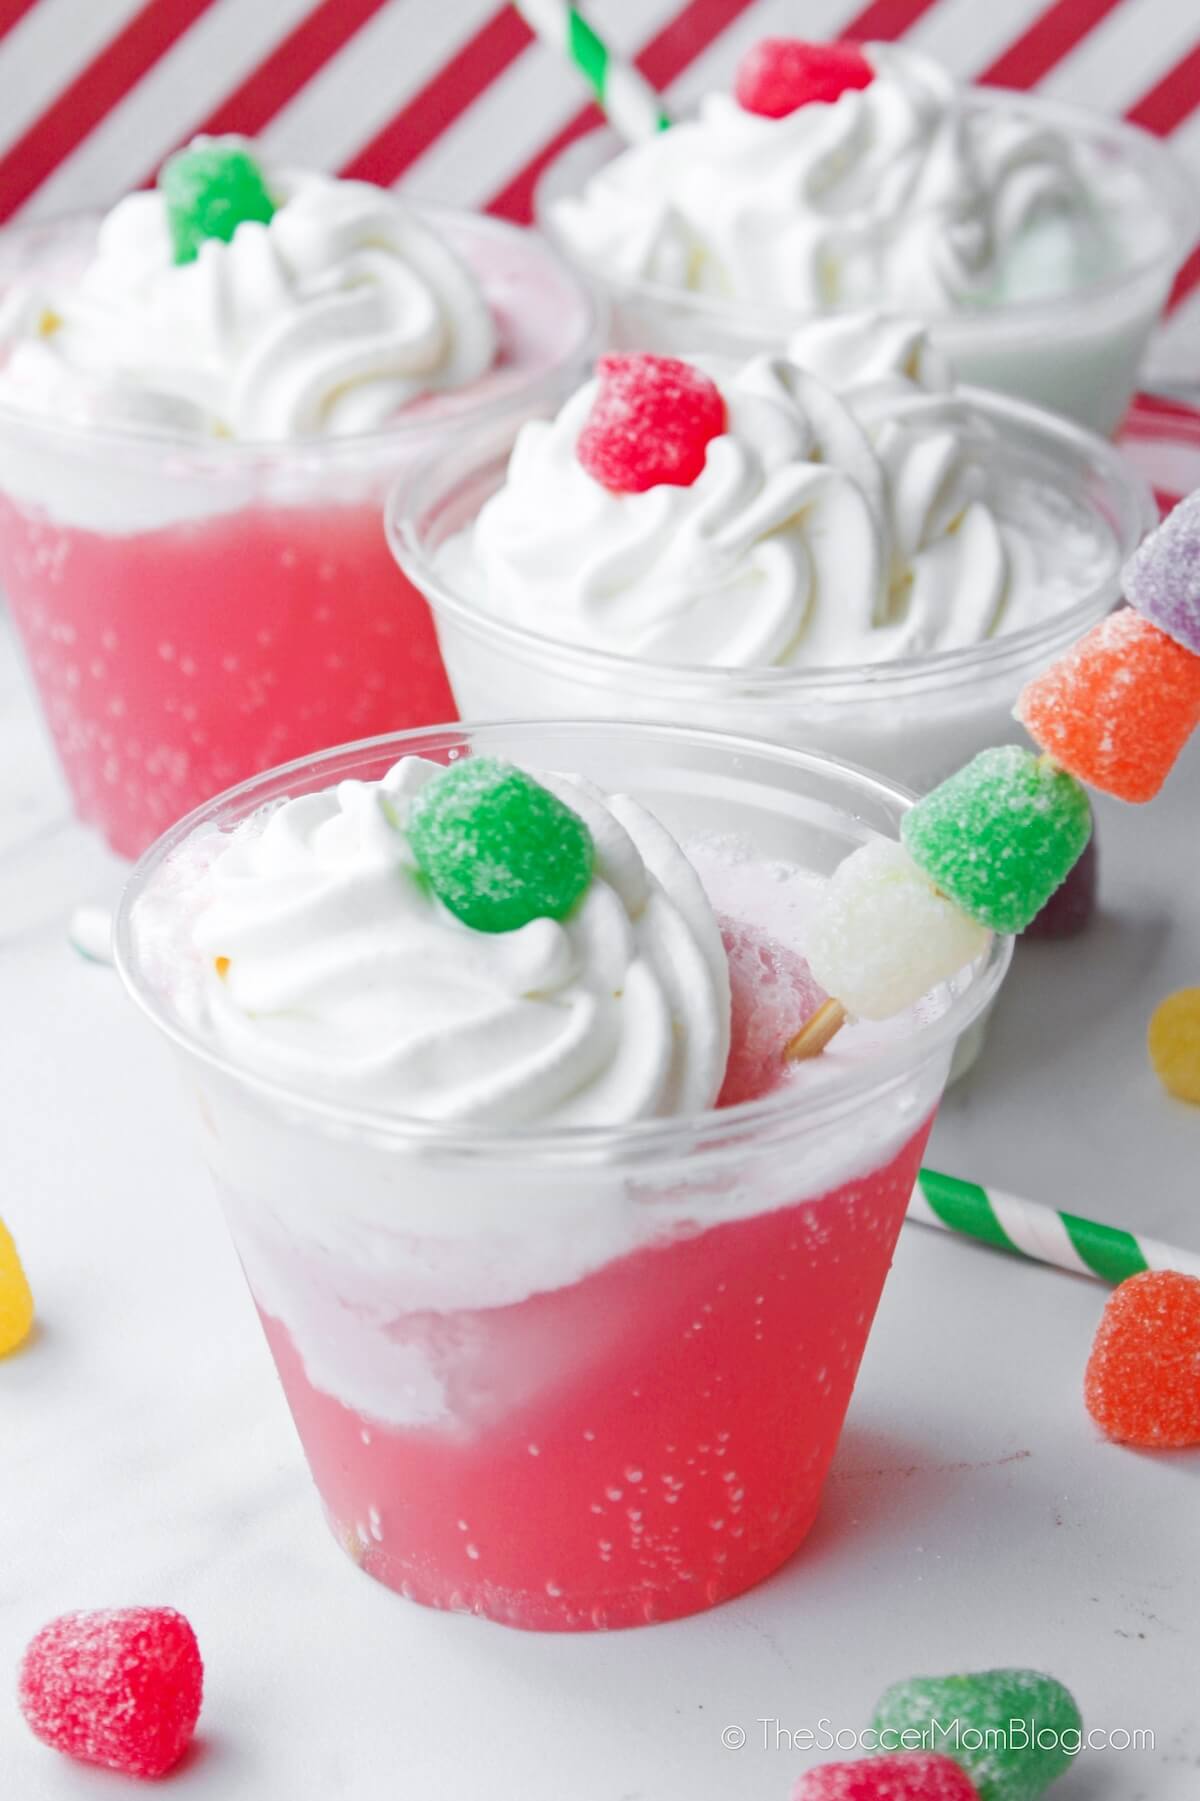 cups with colorful Christmas punch topped with whipped cream and gumdrops